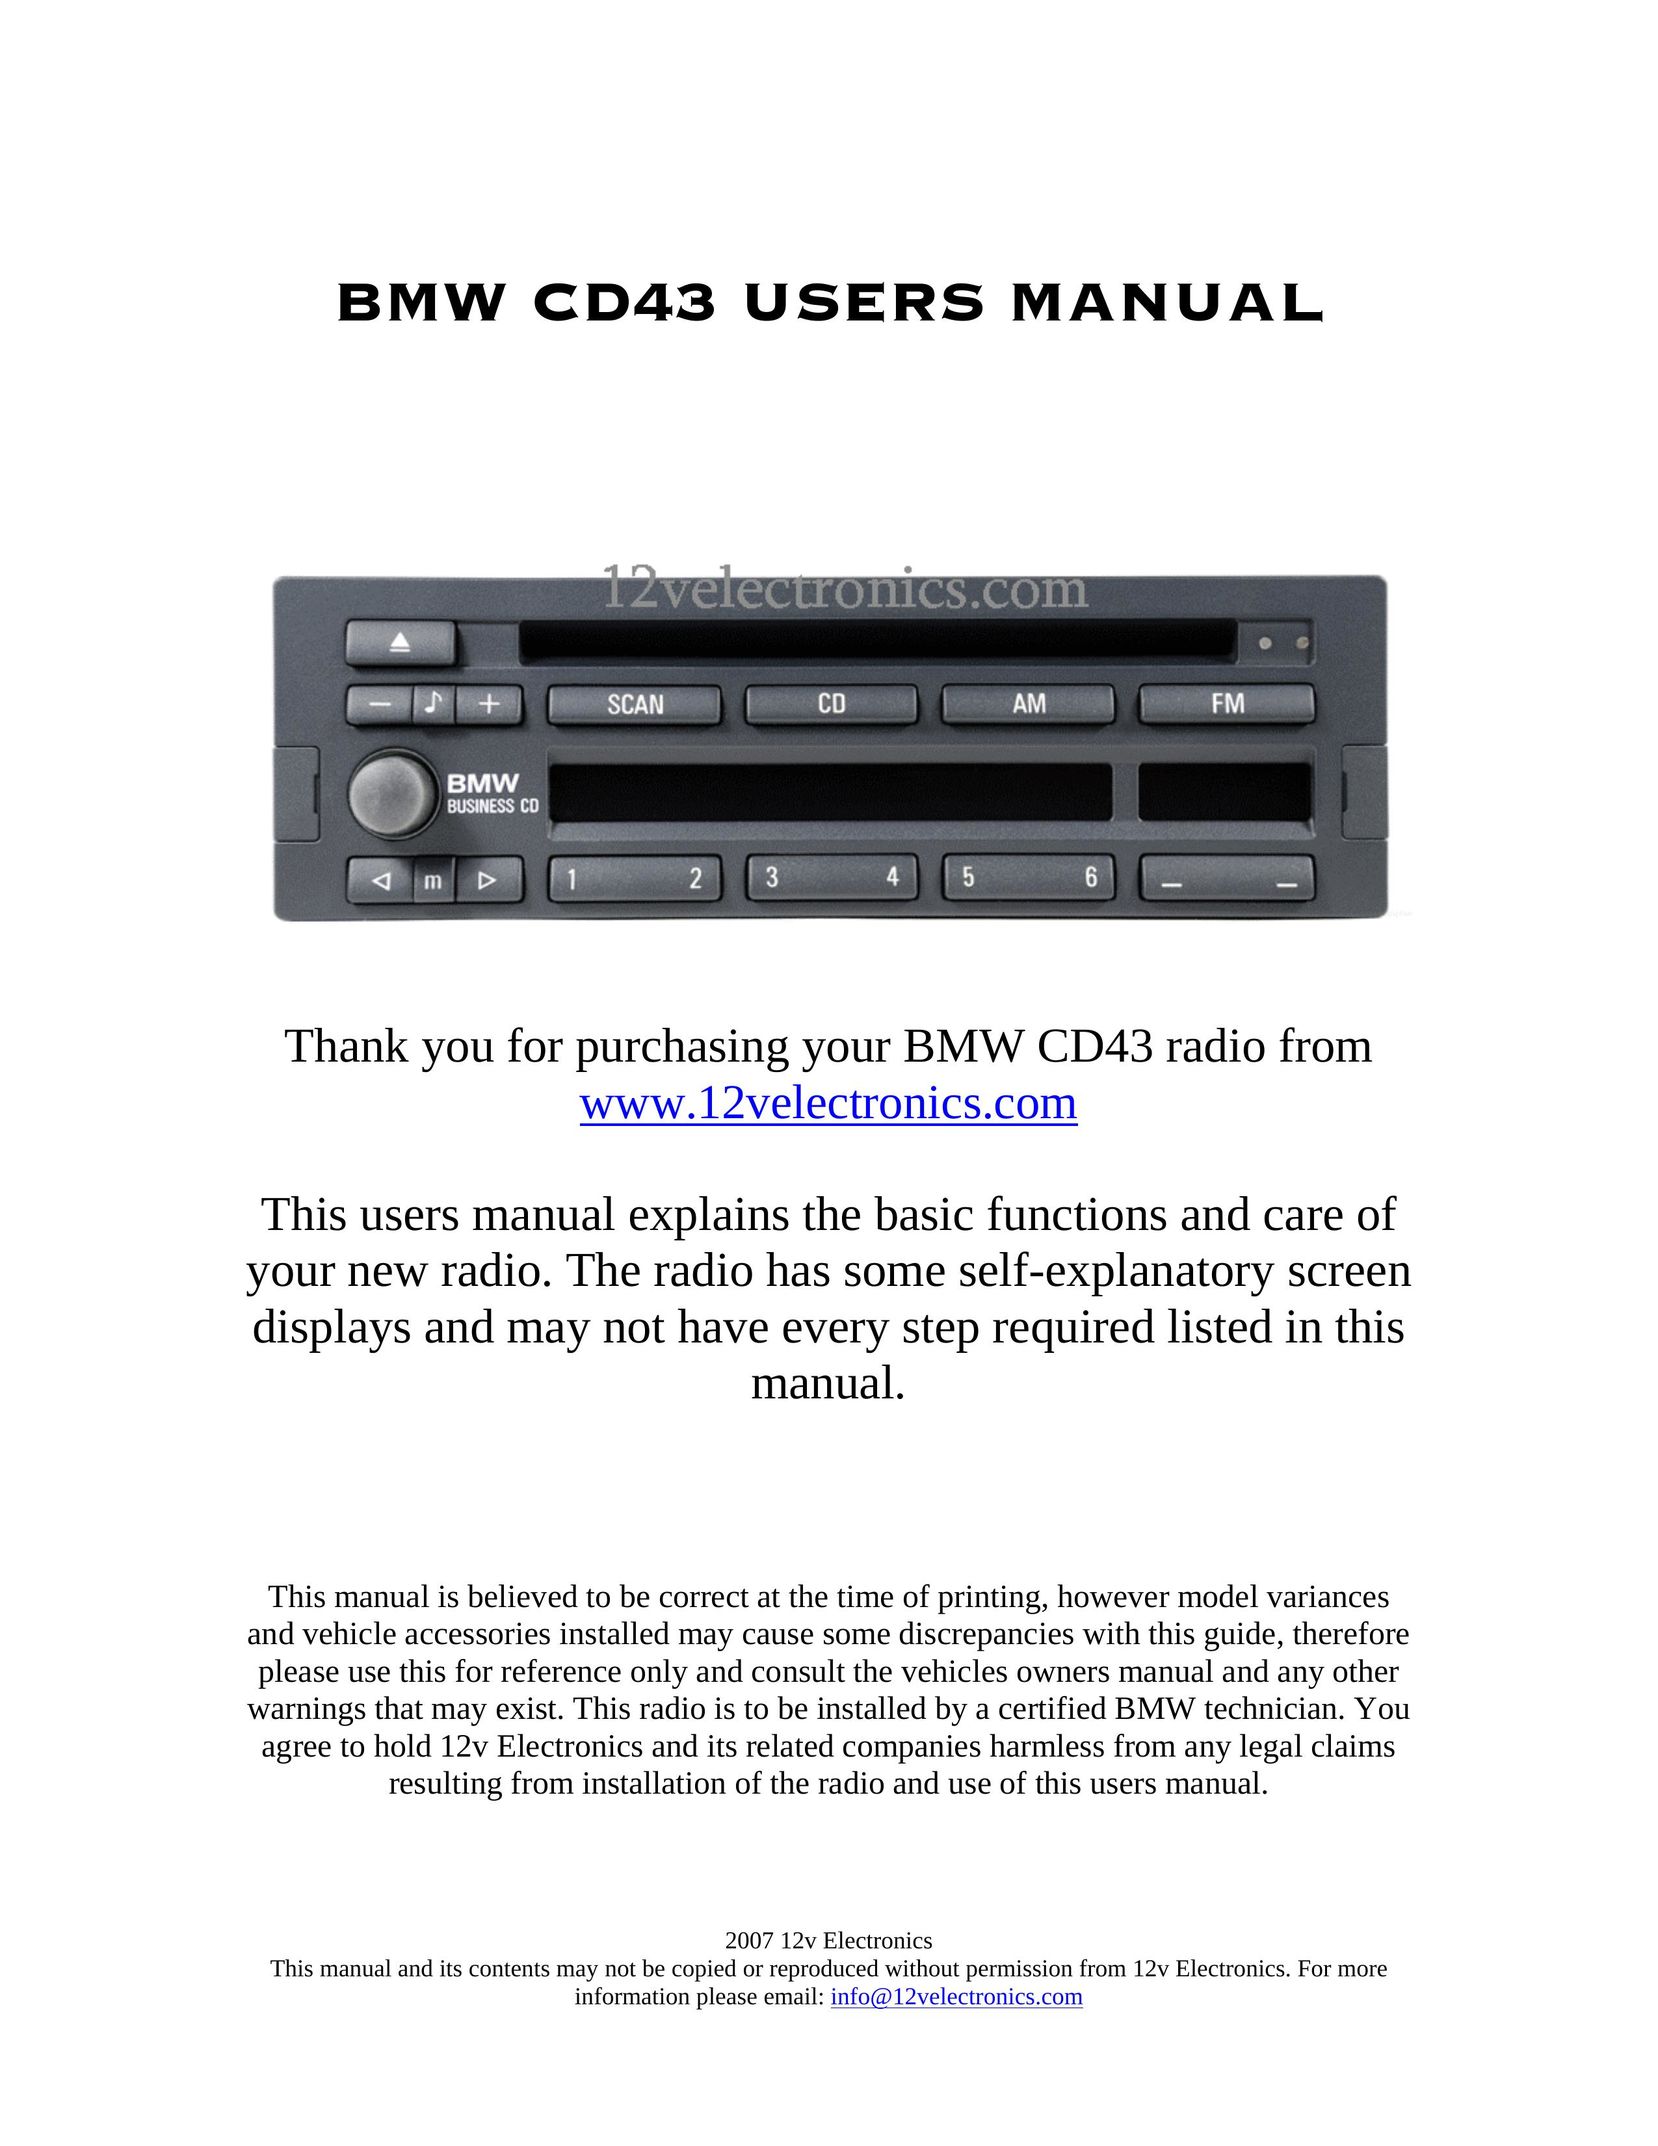 BMW CD43 Car Stereo System User Manual